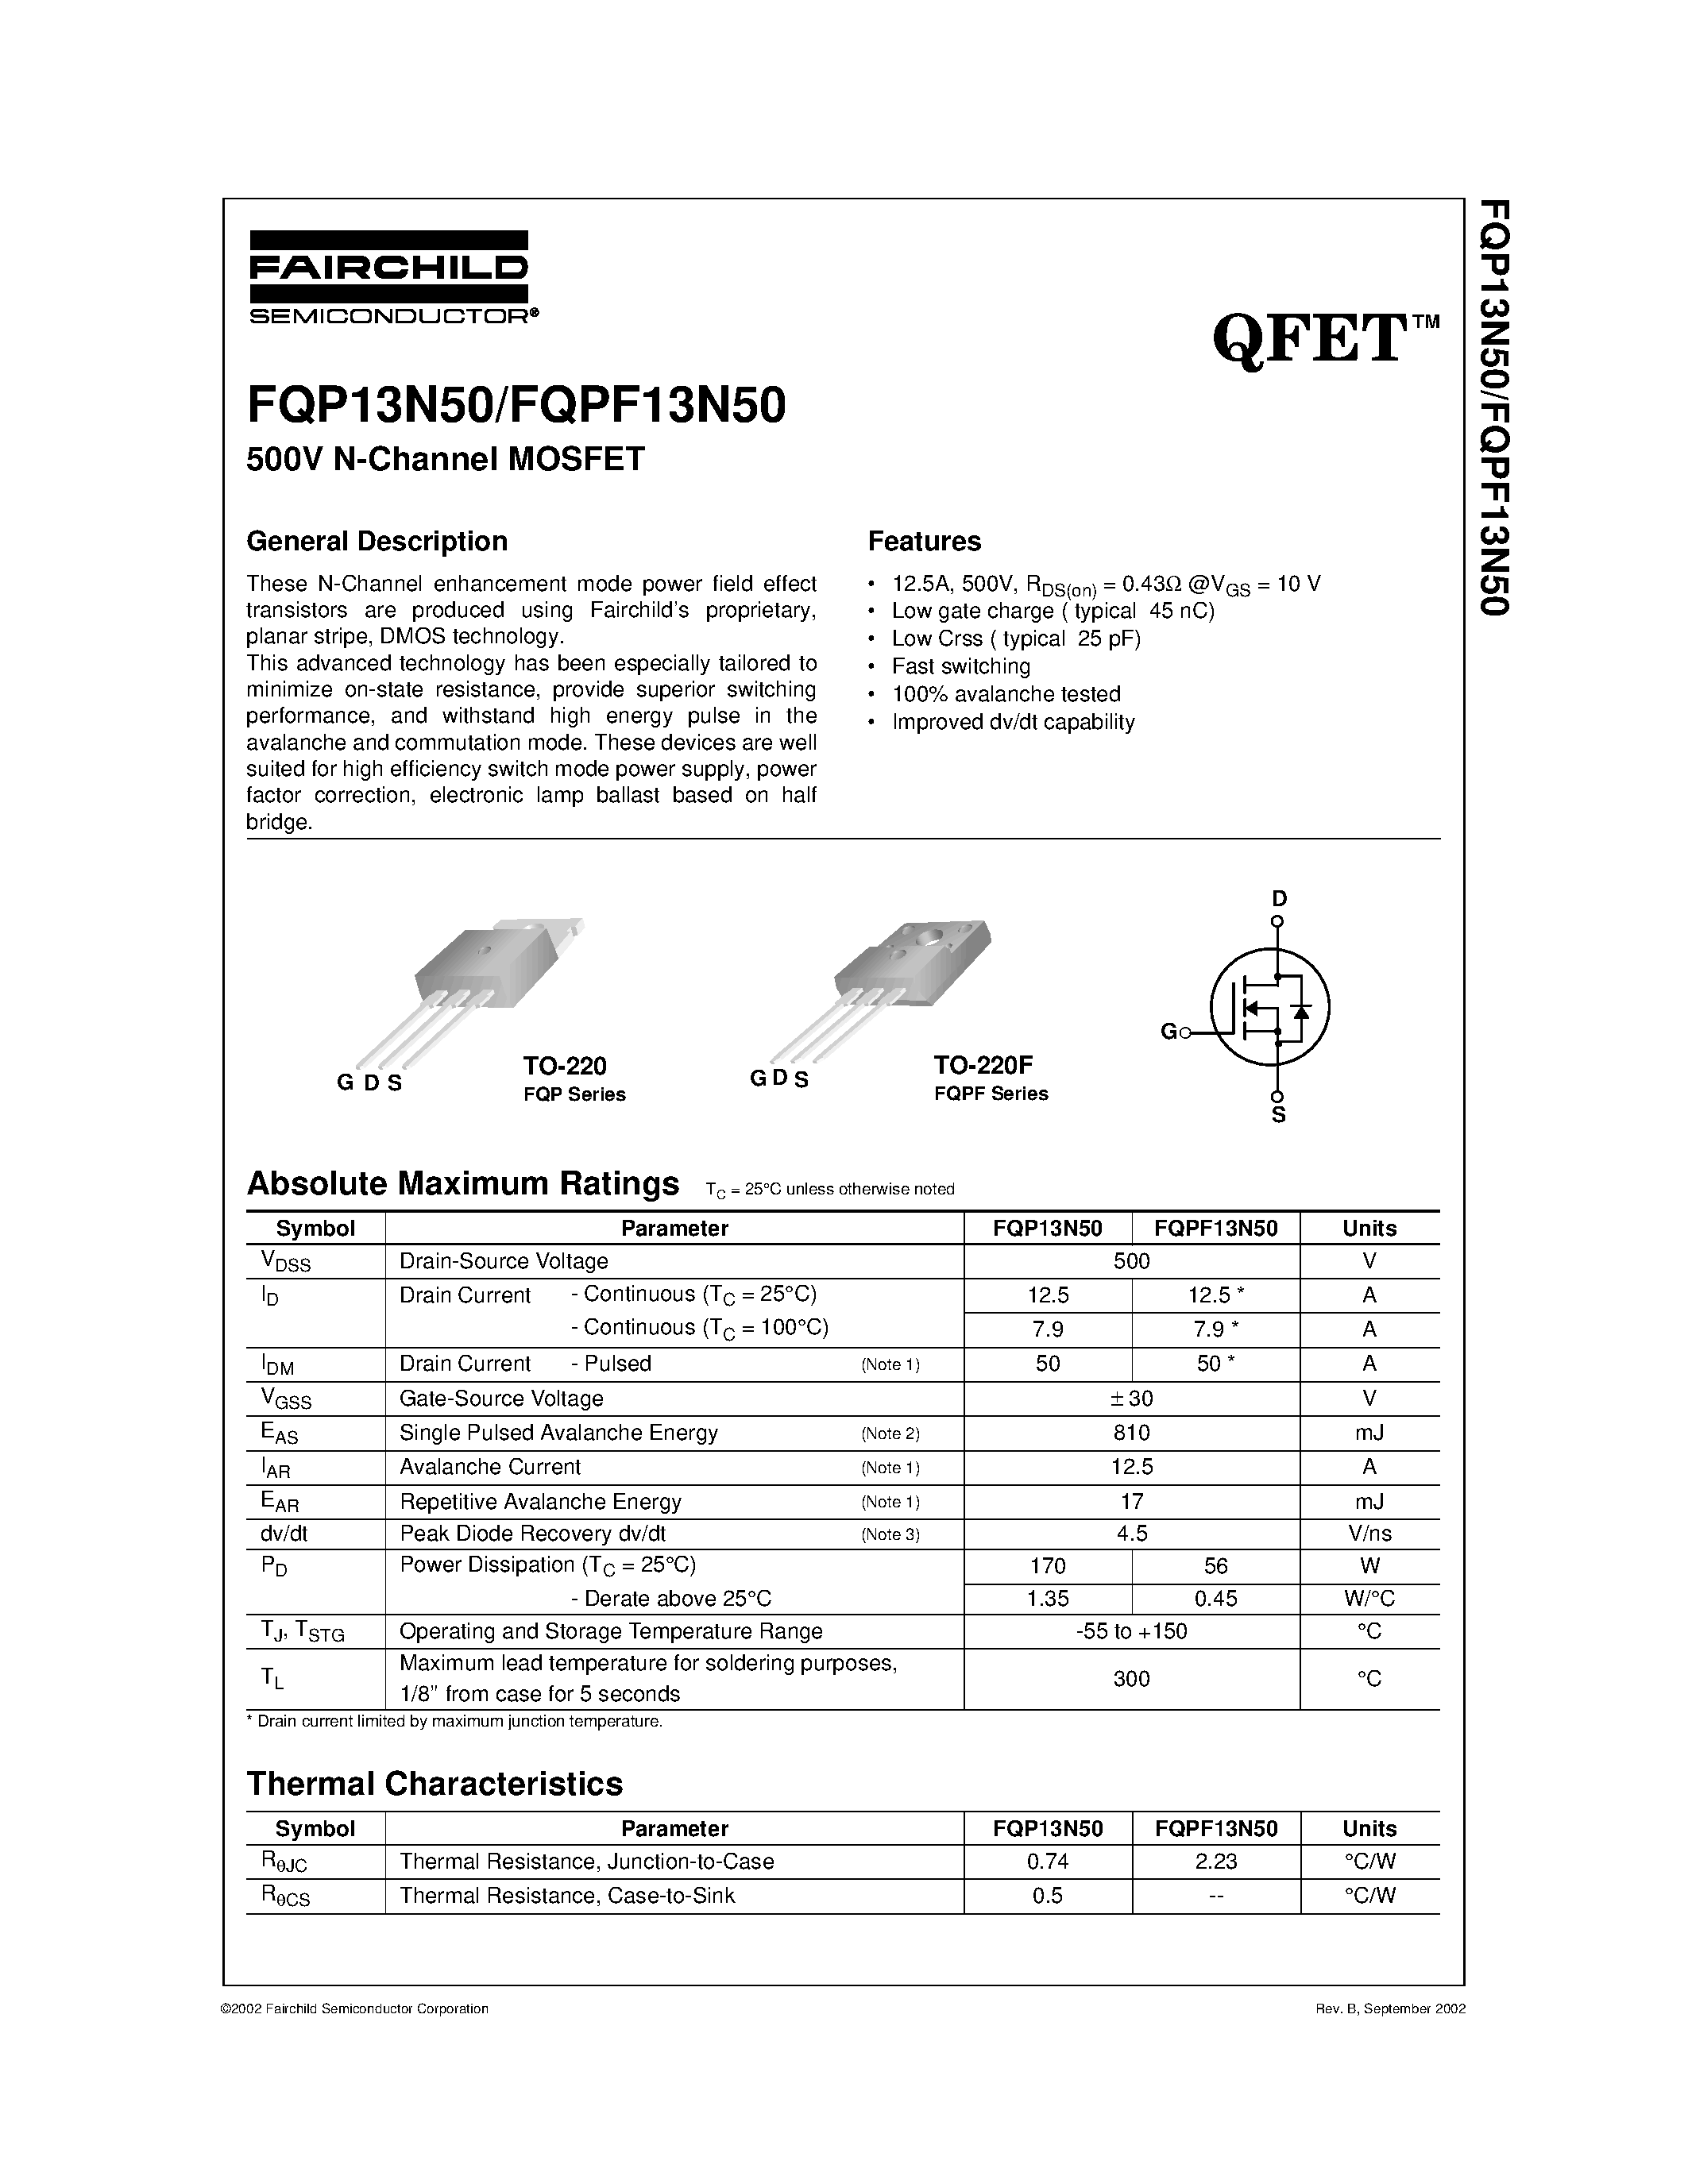 Datasheet FQP13N50 - 500V N-Channel MOSFET page 1